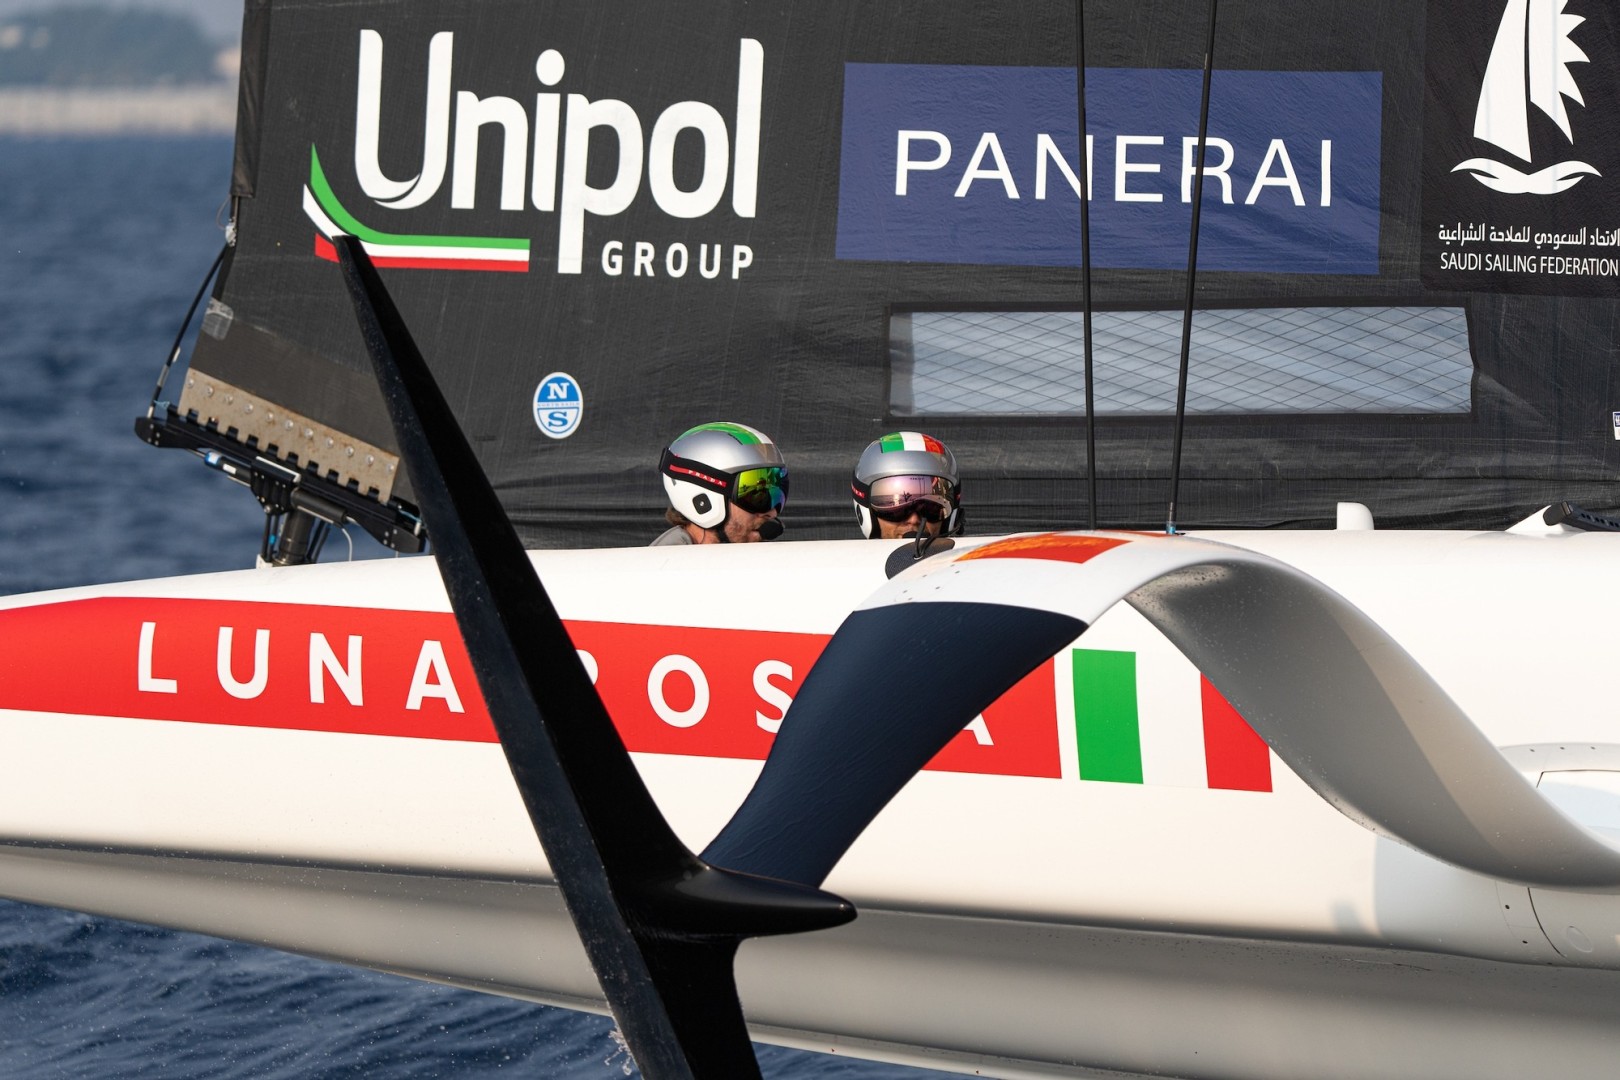 America's Cup, Italians promote next generation as the world’s best arrive in Jeddah